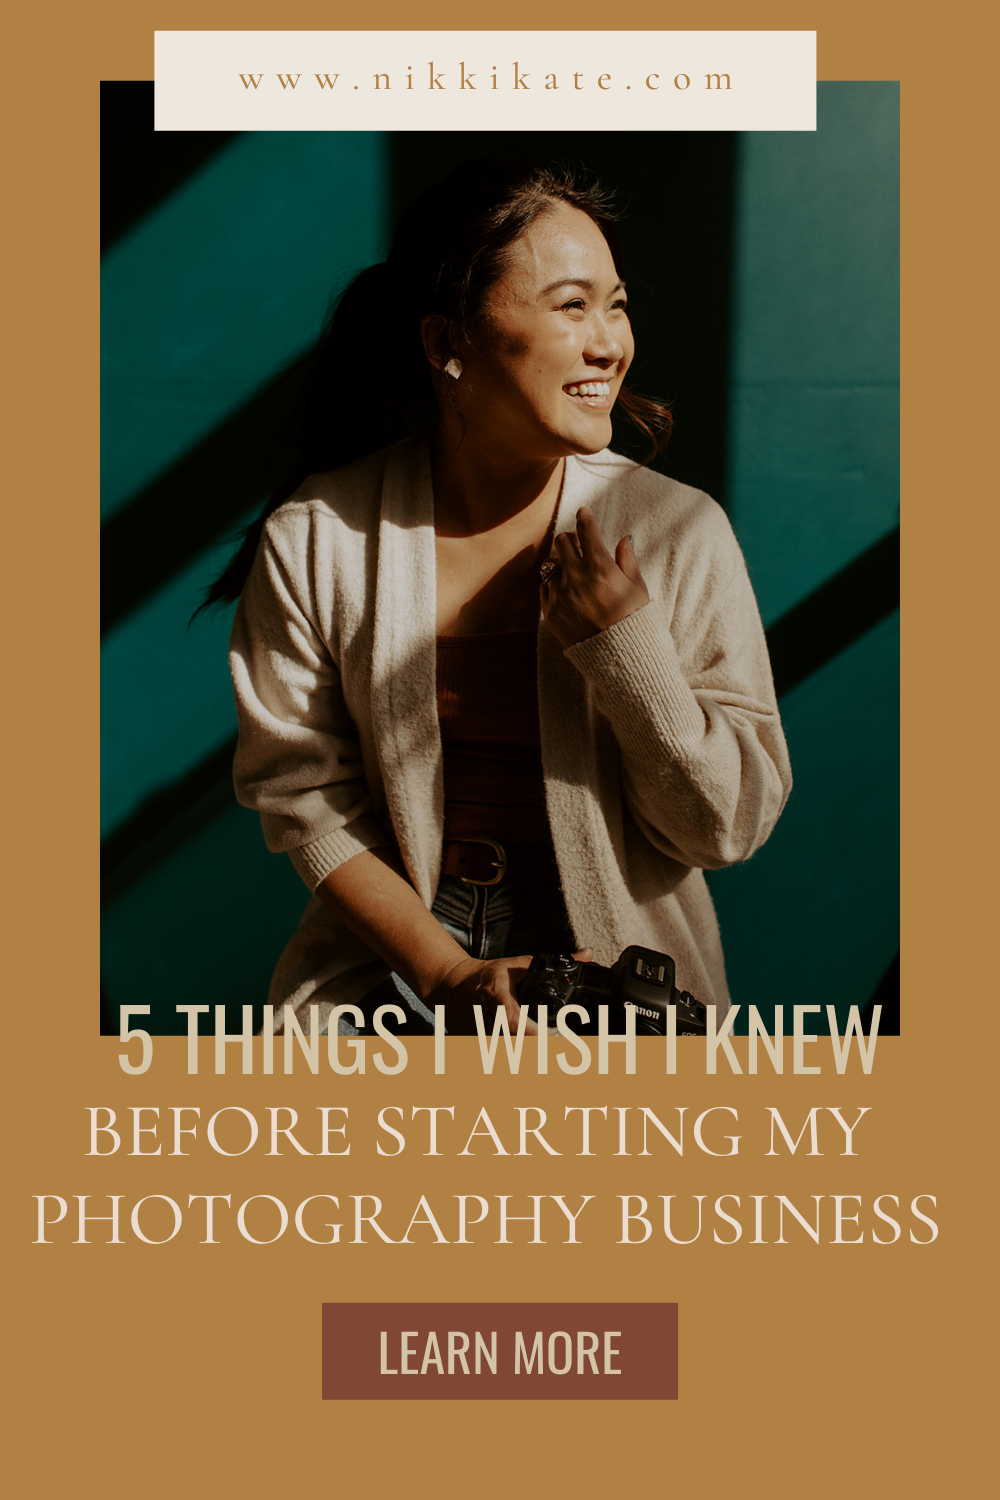 5-things-I-wish-I-knew-before-starting-my-photography-business-nikki-kate-photography.png